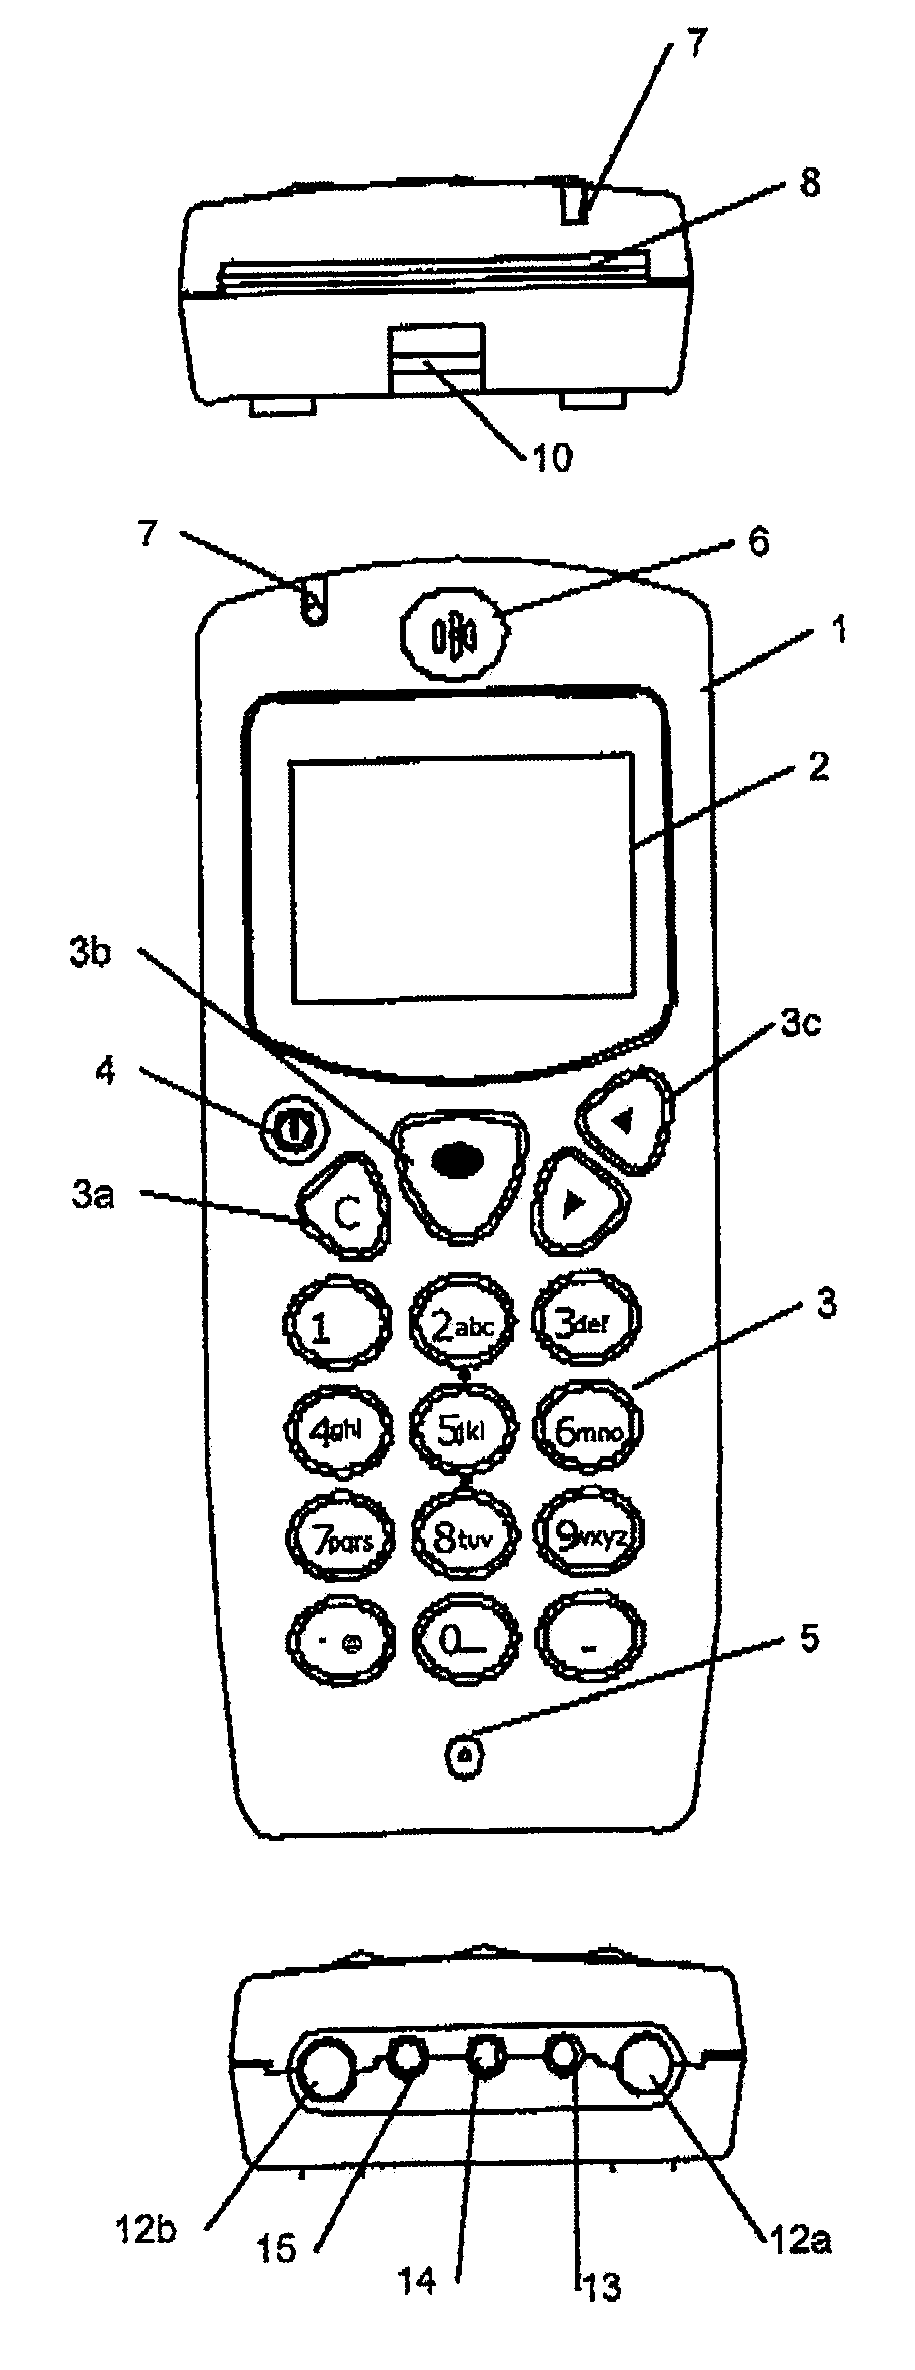 Participant response system and method